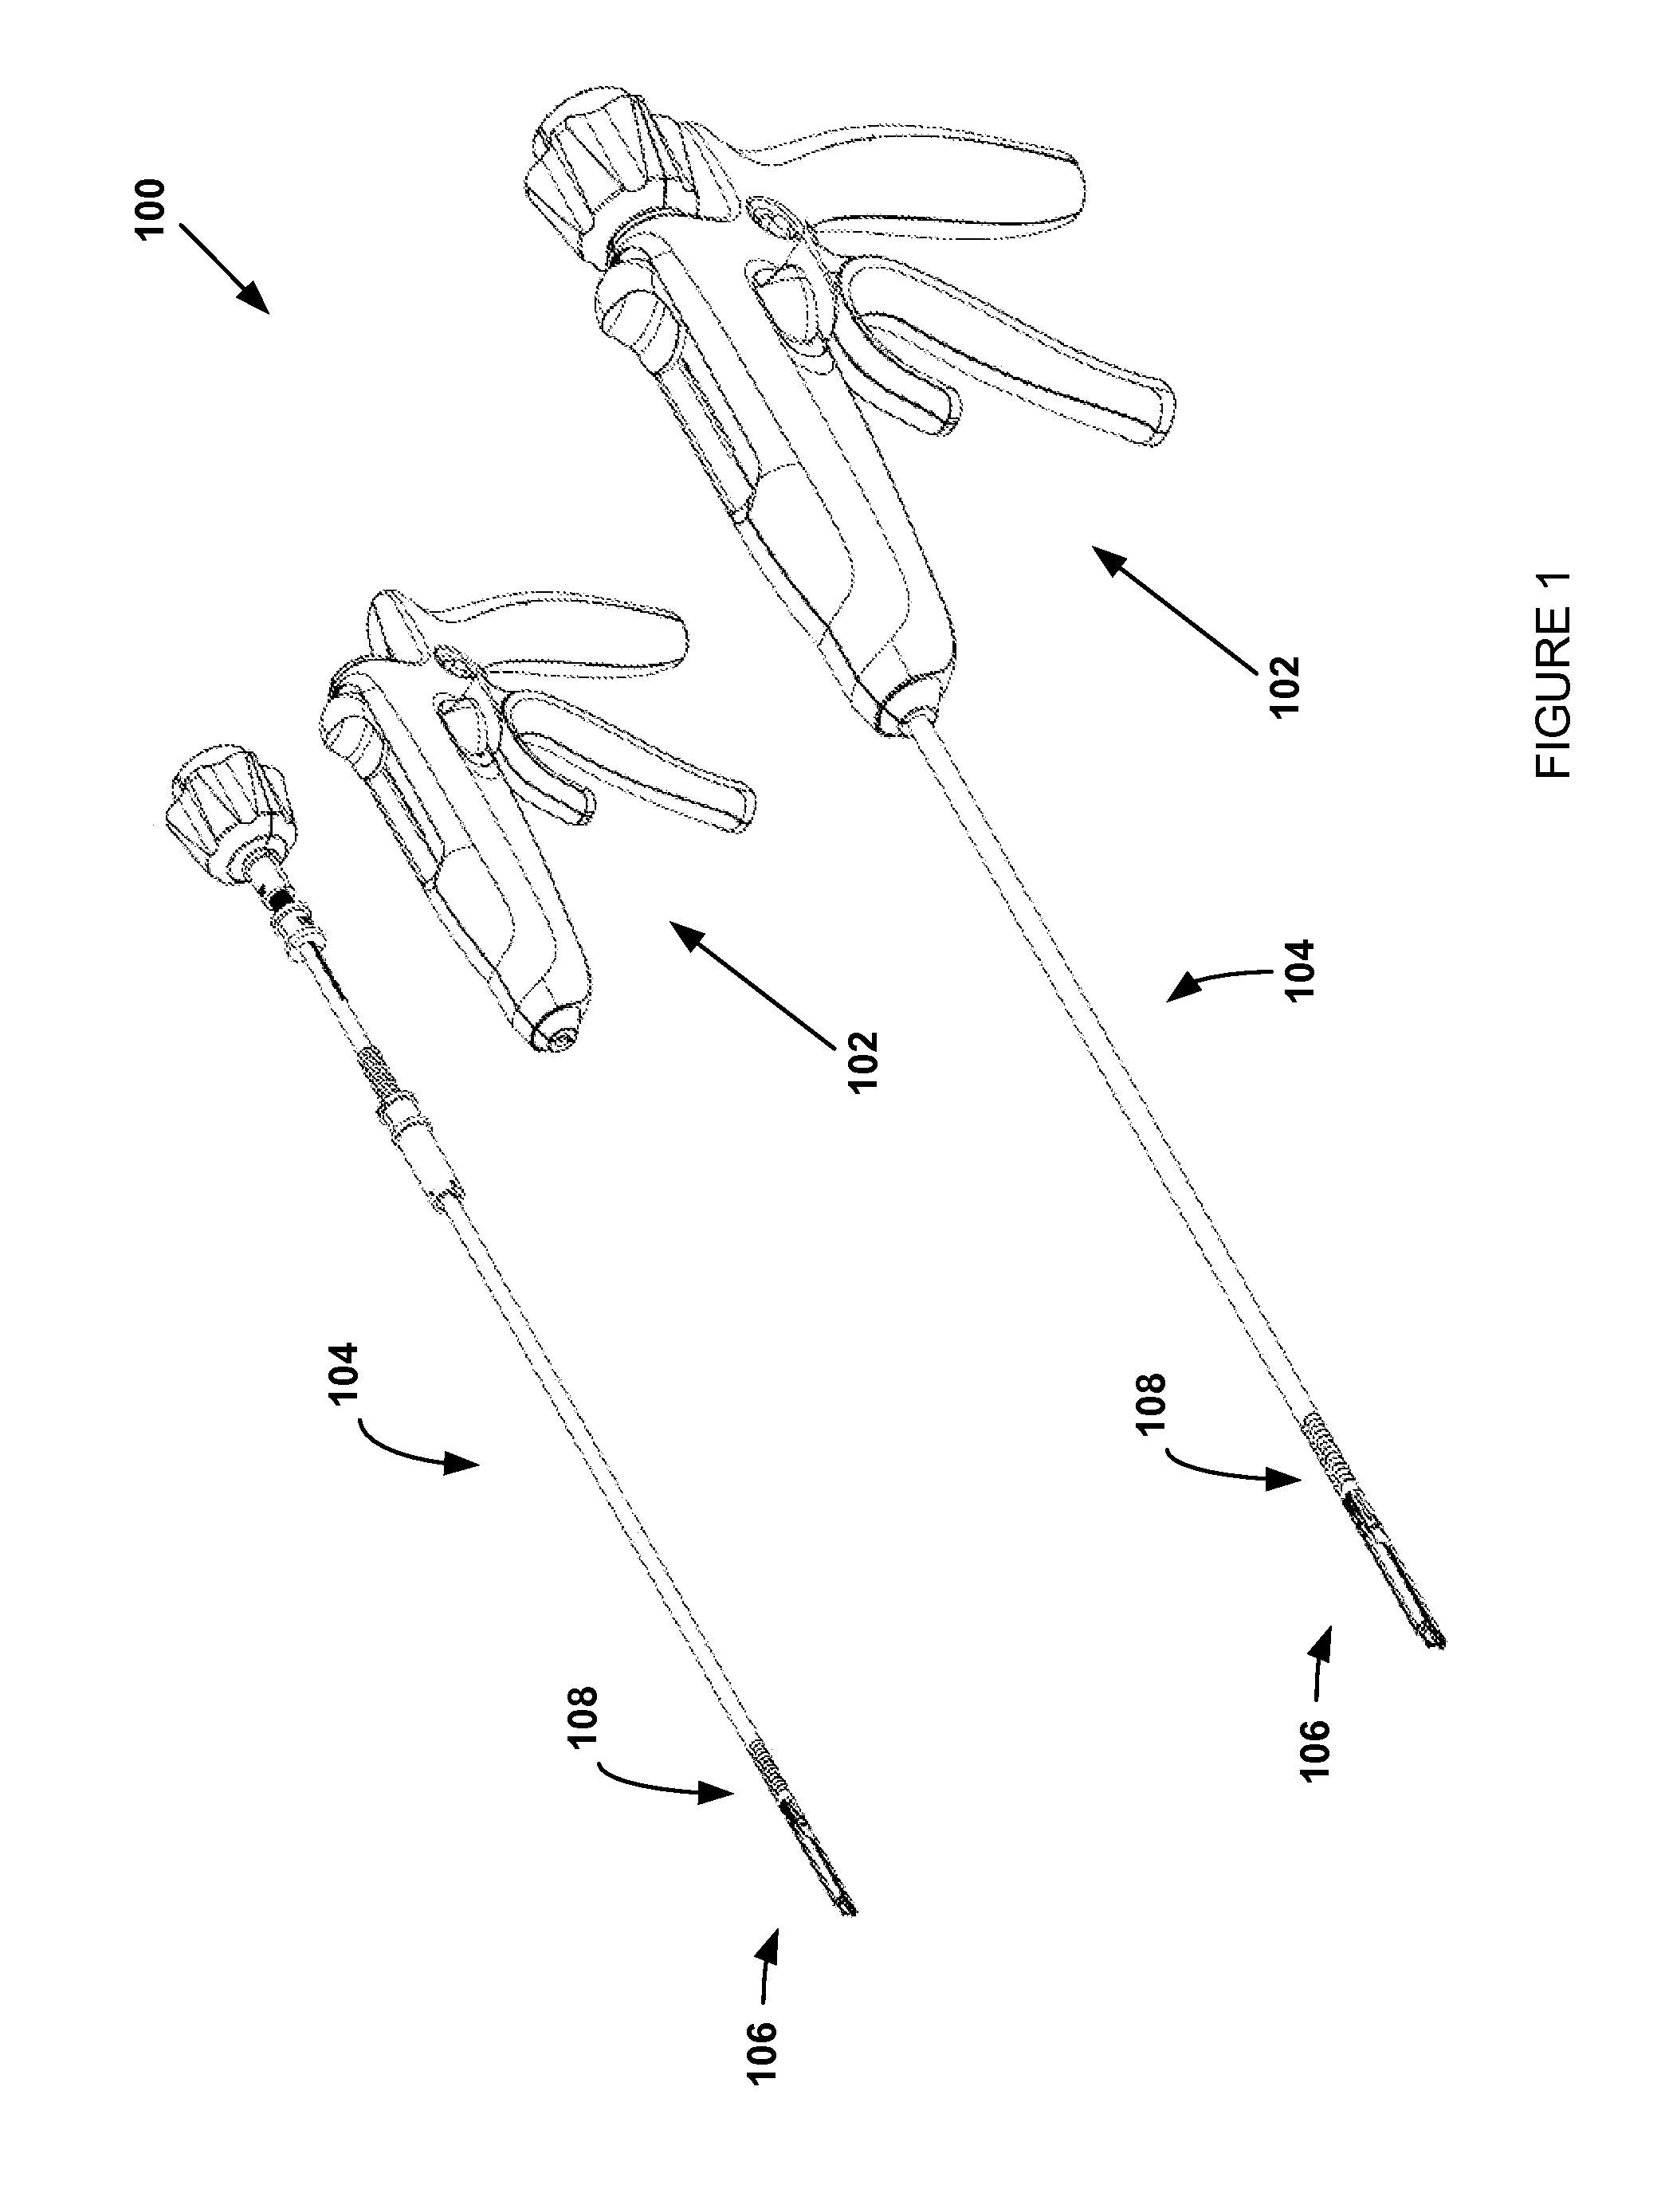 Microcutter stapling apparatus clamp and deploy mechanisms systems and methods